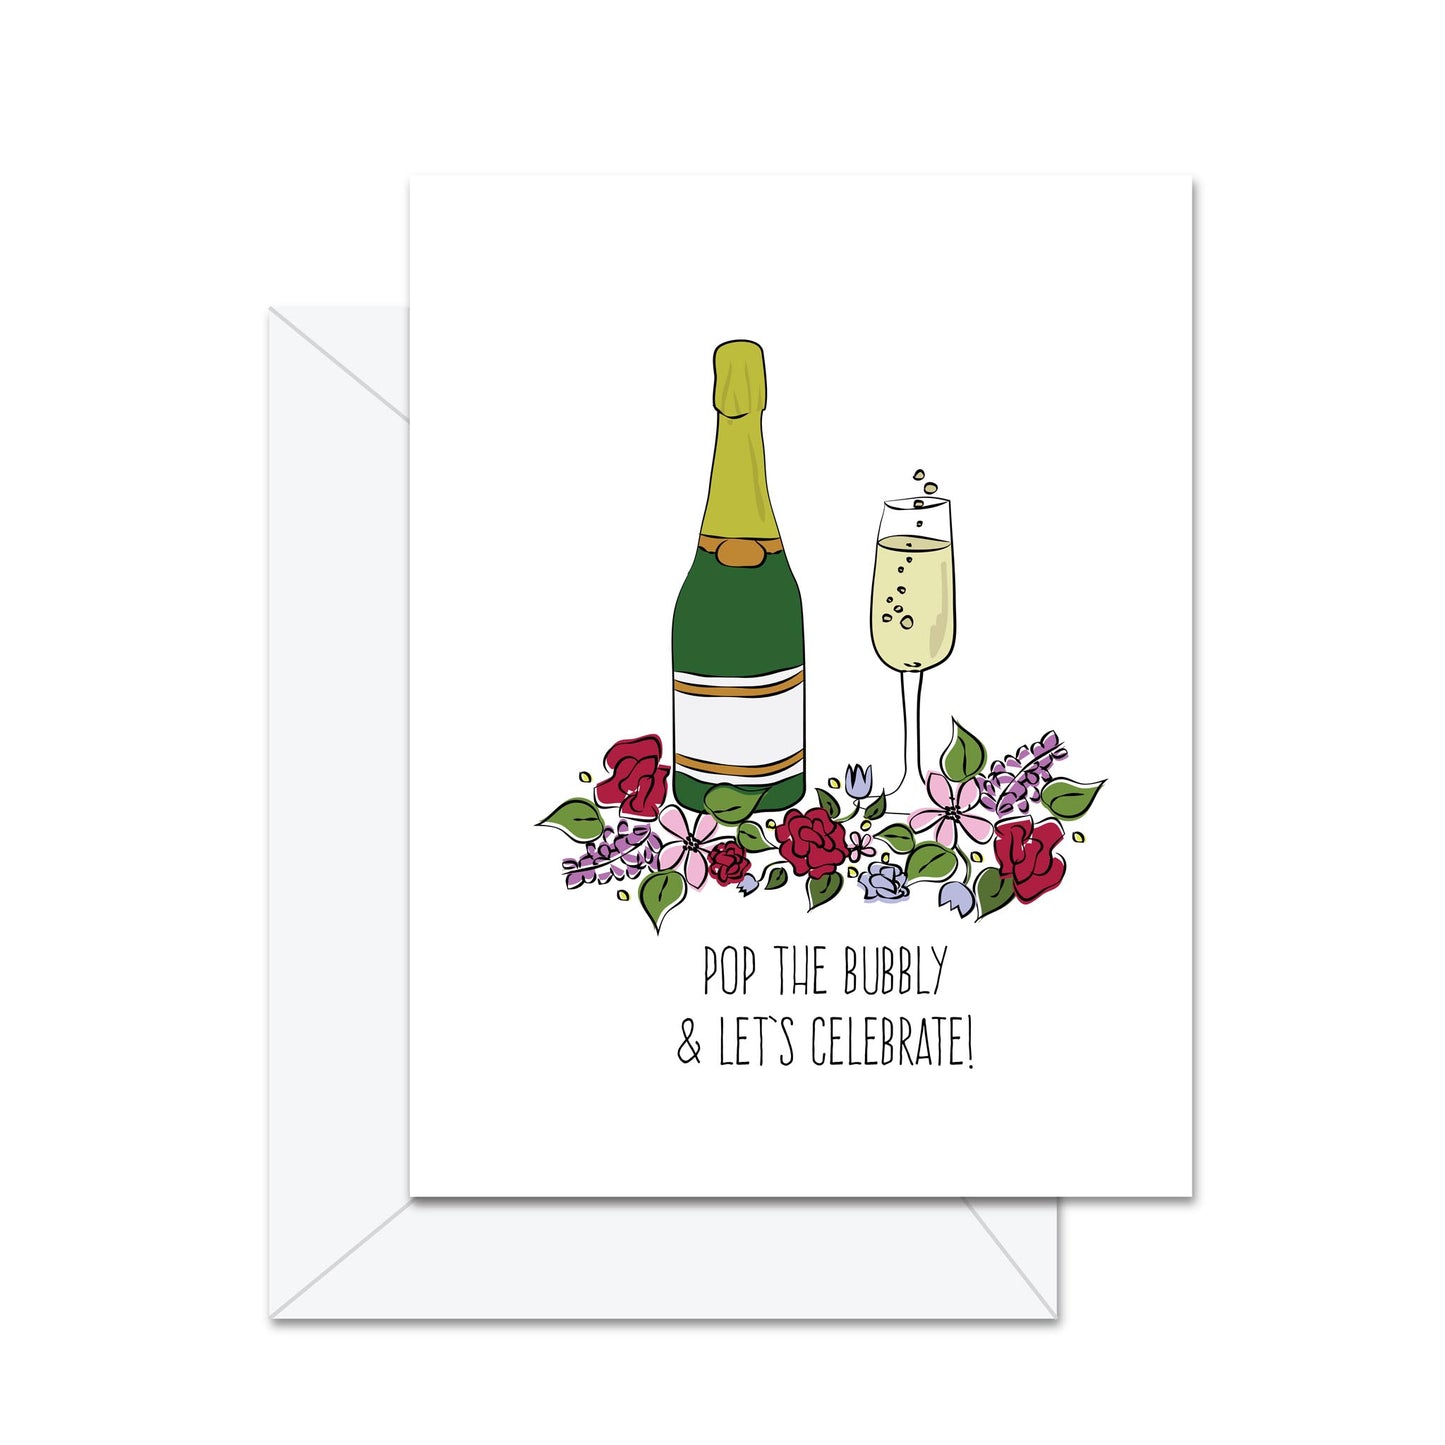 Pop The Bubbly & Let's Celebrate! - Greeting Card